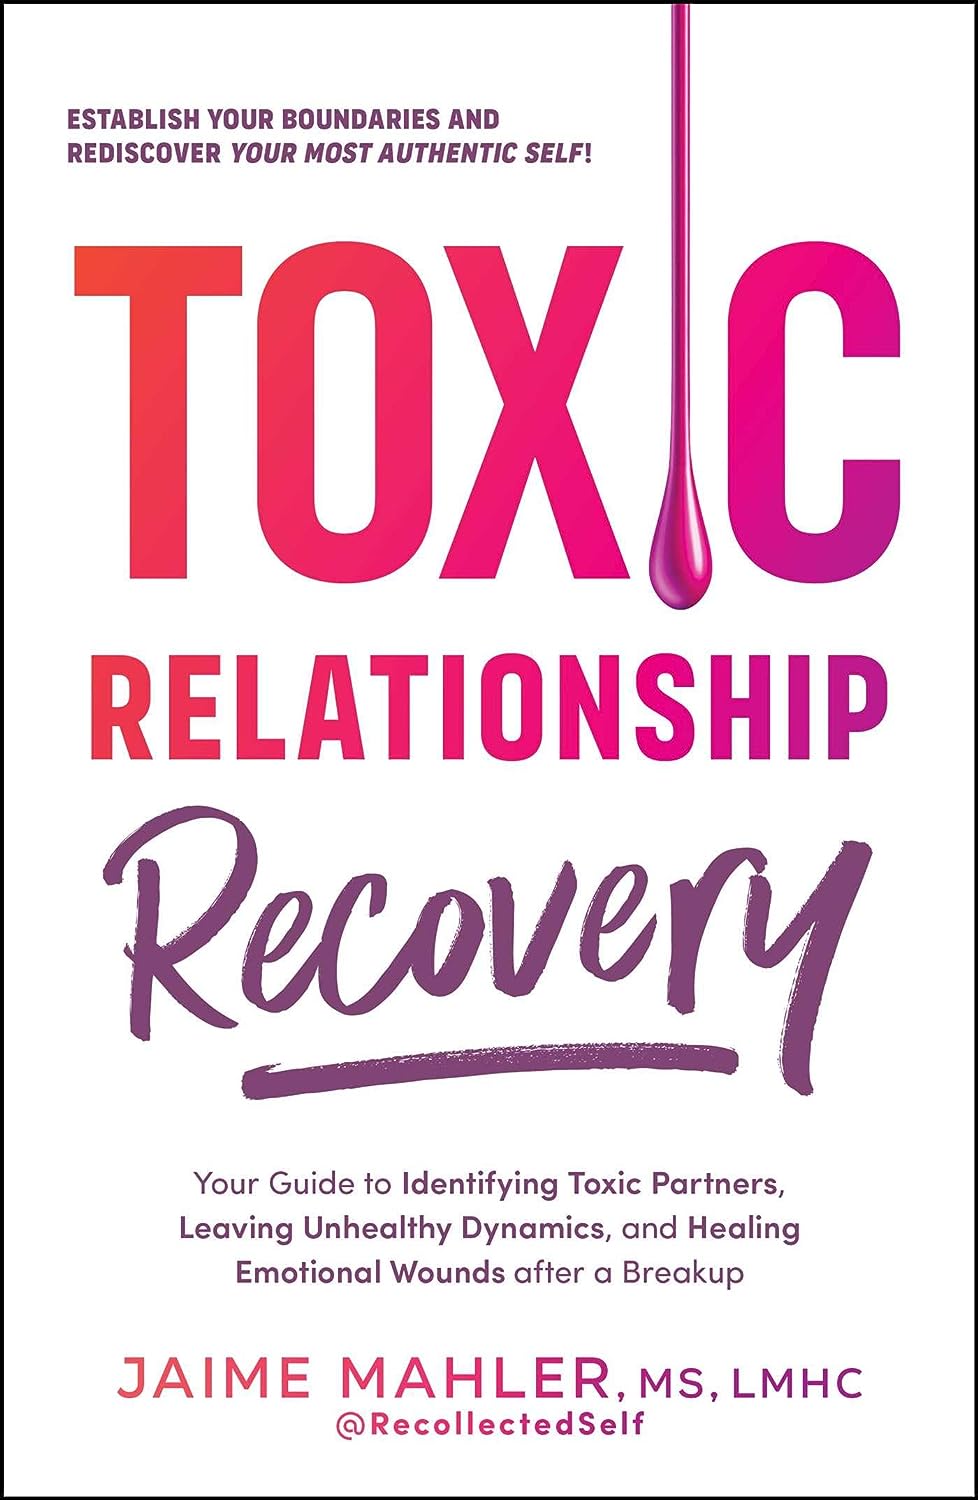 Toxic Relationship Recovery Your Guide to Identifying Toxic Partners, Leaving Unhealthy Dynamics, and Healing Emotional Wounds After a Breakup - SureShot Books Publishing LLC